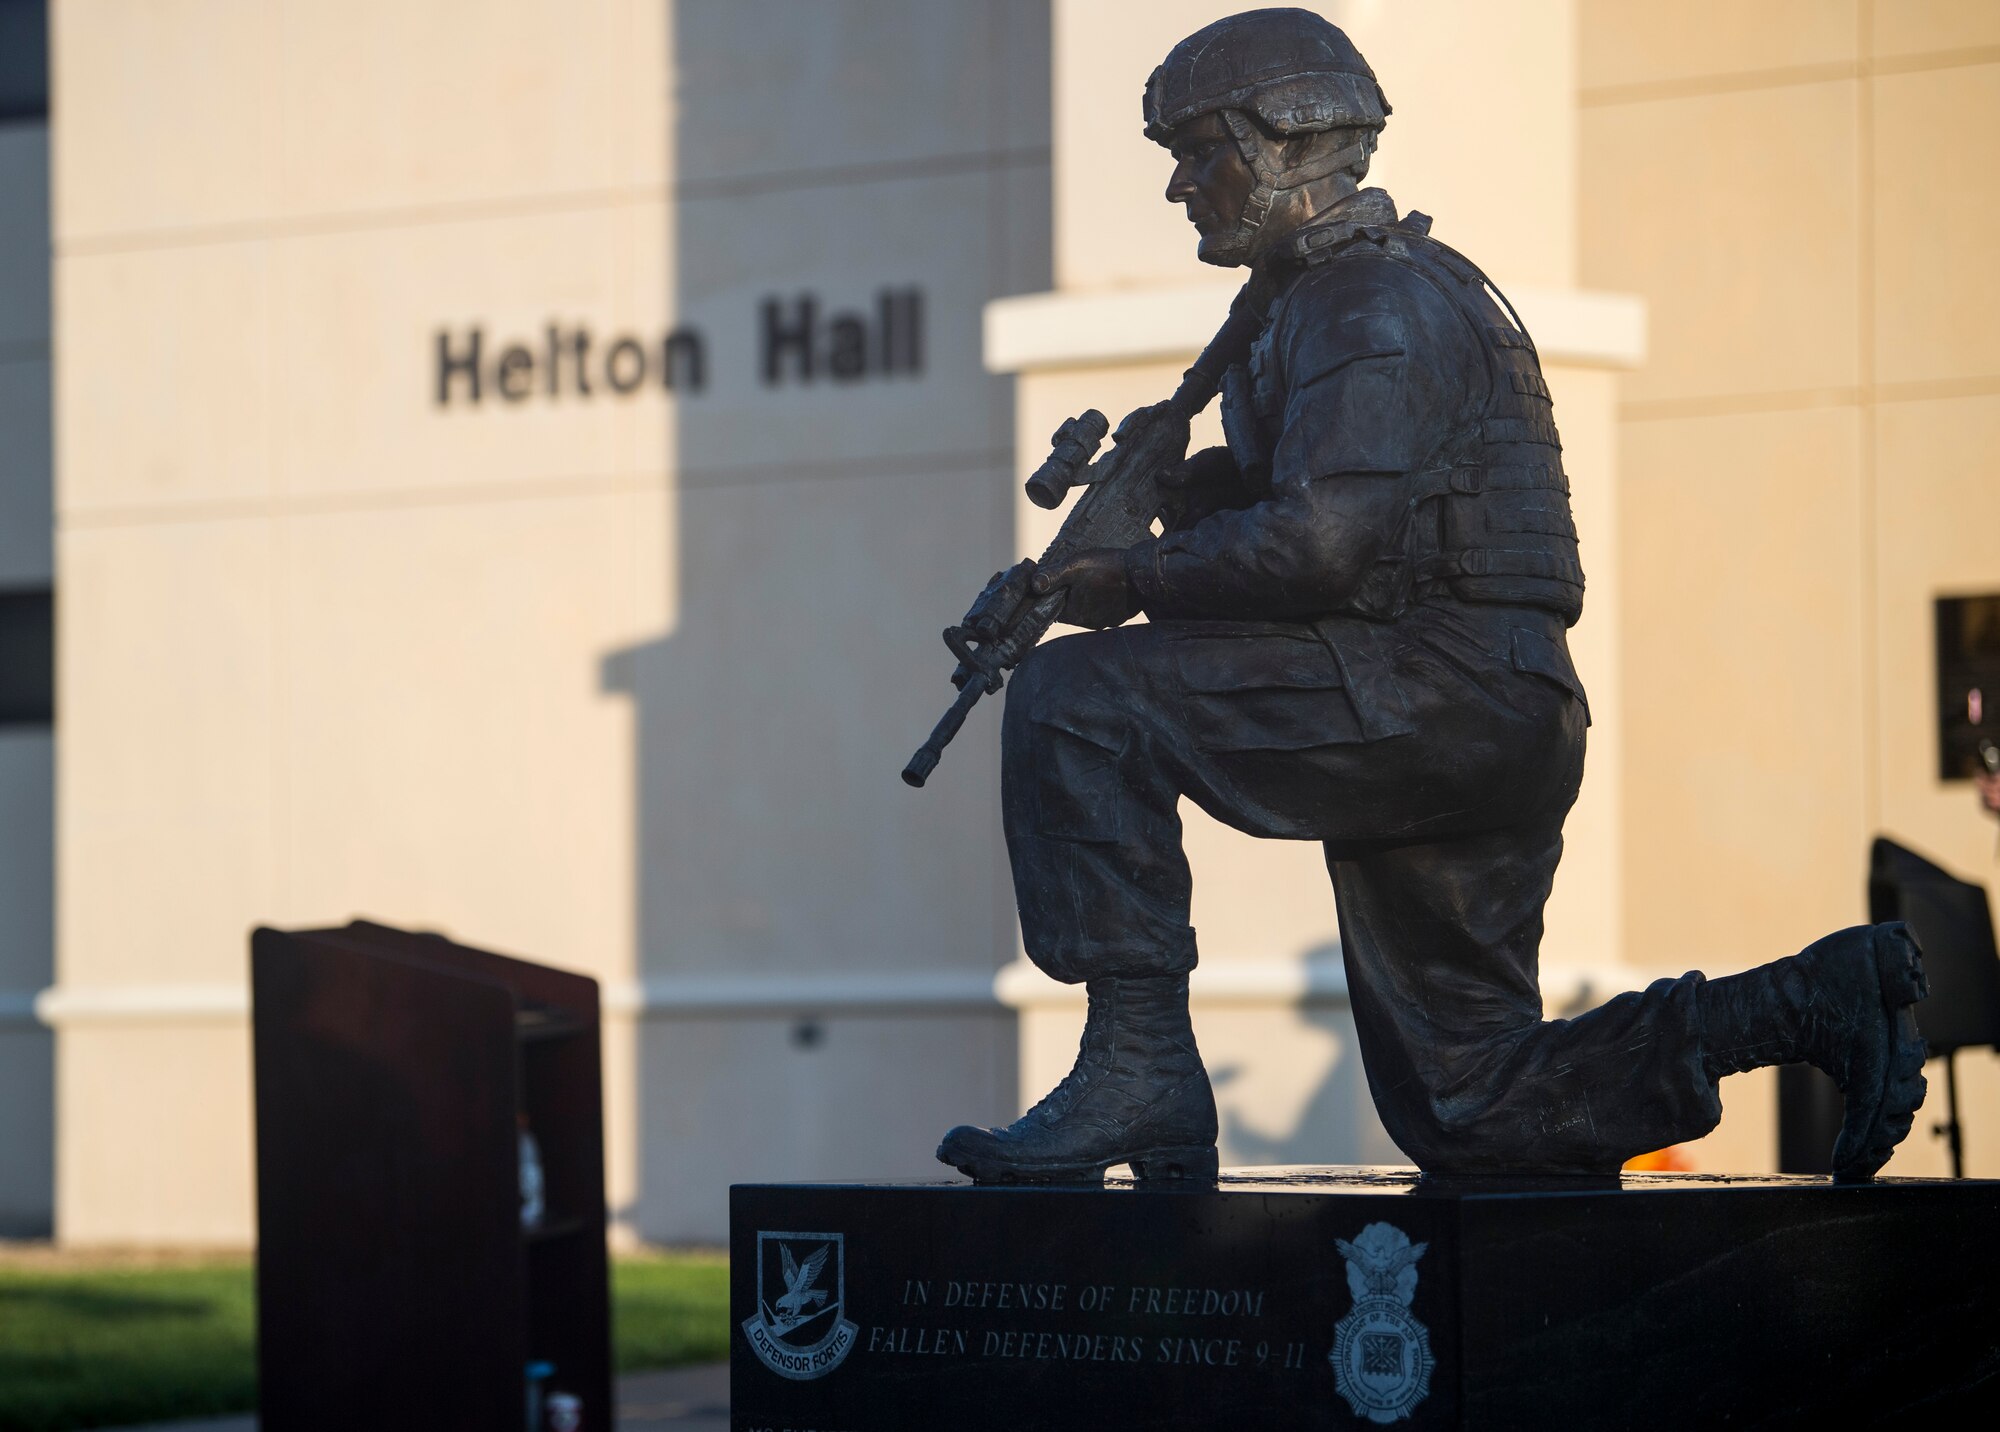 A statue memorializing 1st Lt. Joseph Helton, watches over the entrance to the 6th Security Forces Squadron’s headquarters building at MacDill Air Force Base, Fla., Sept. 18, 2020.